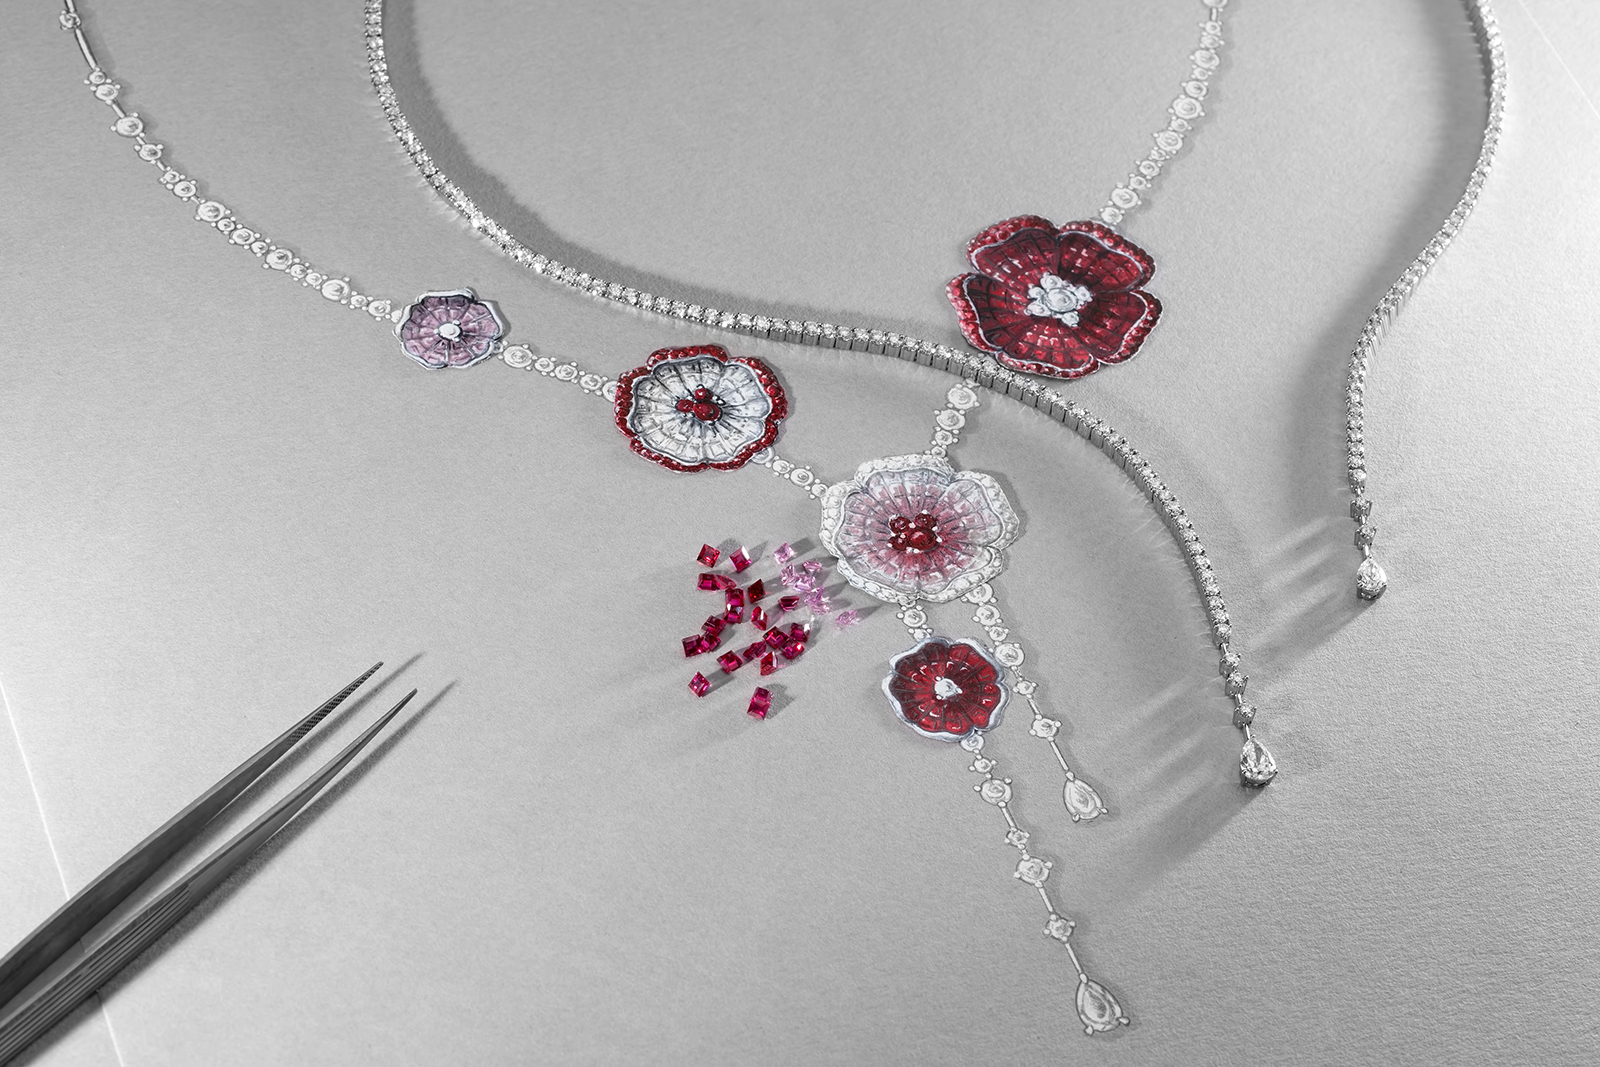 Stenzhorn Sakura necklace with rubies, pink sapphires and diamonds